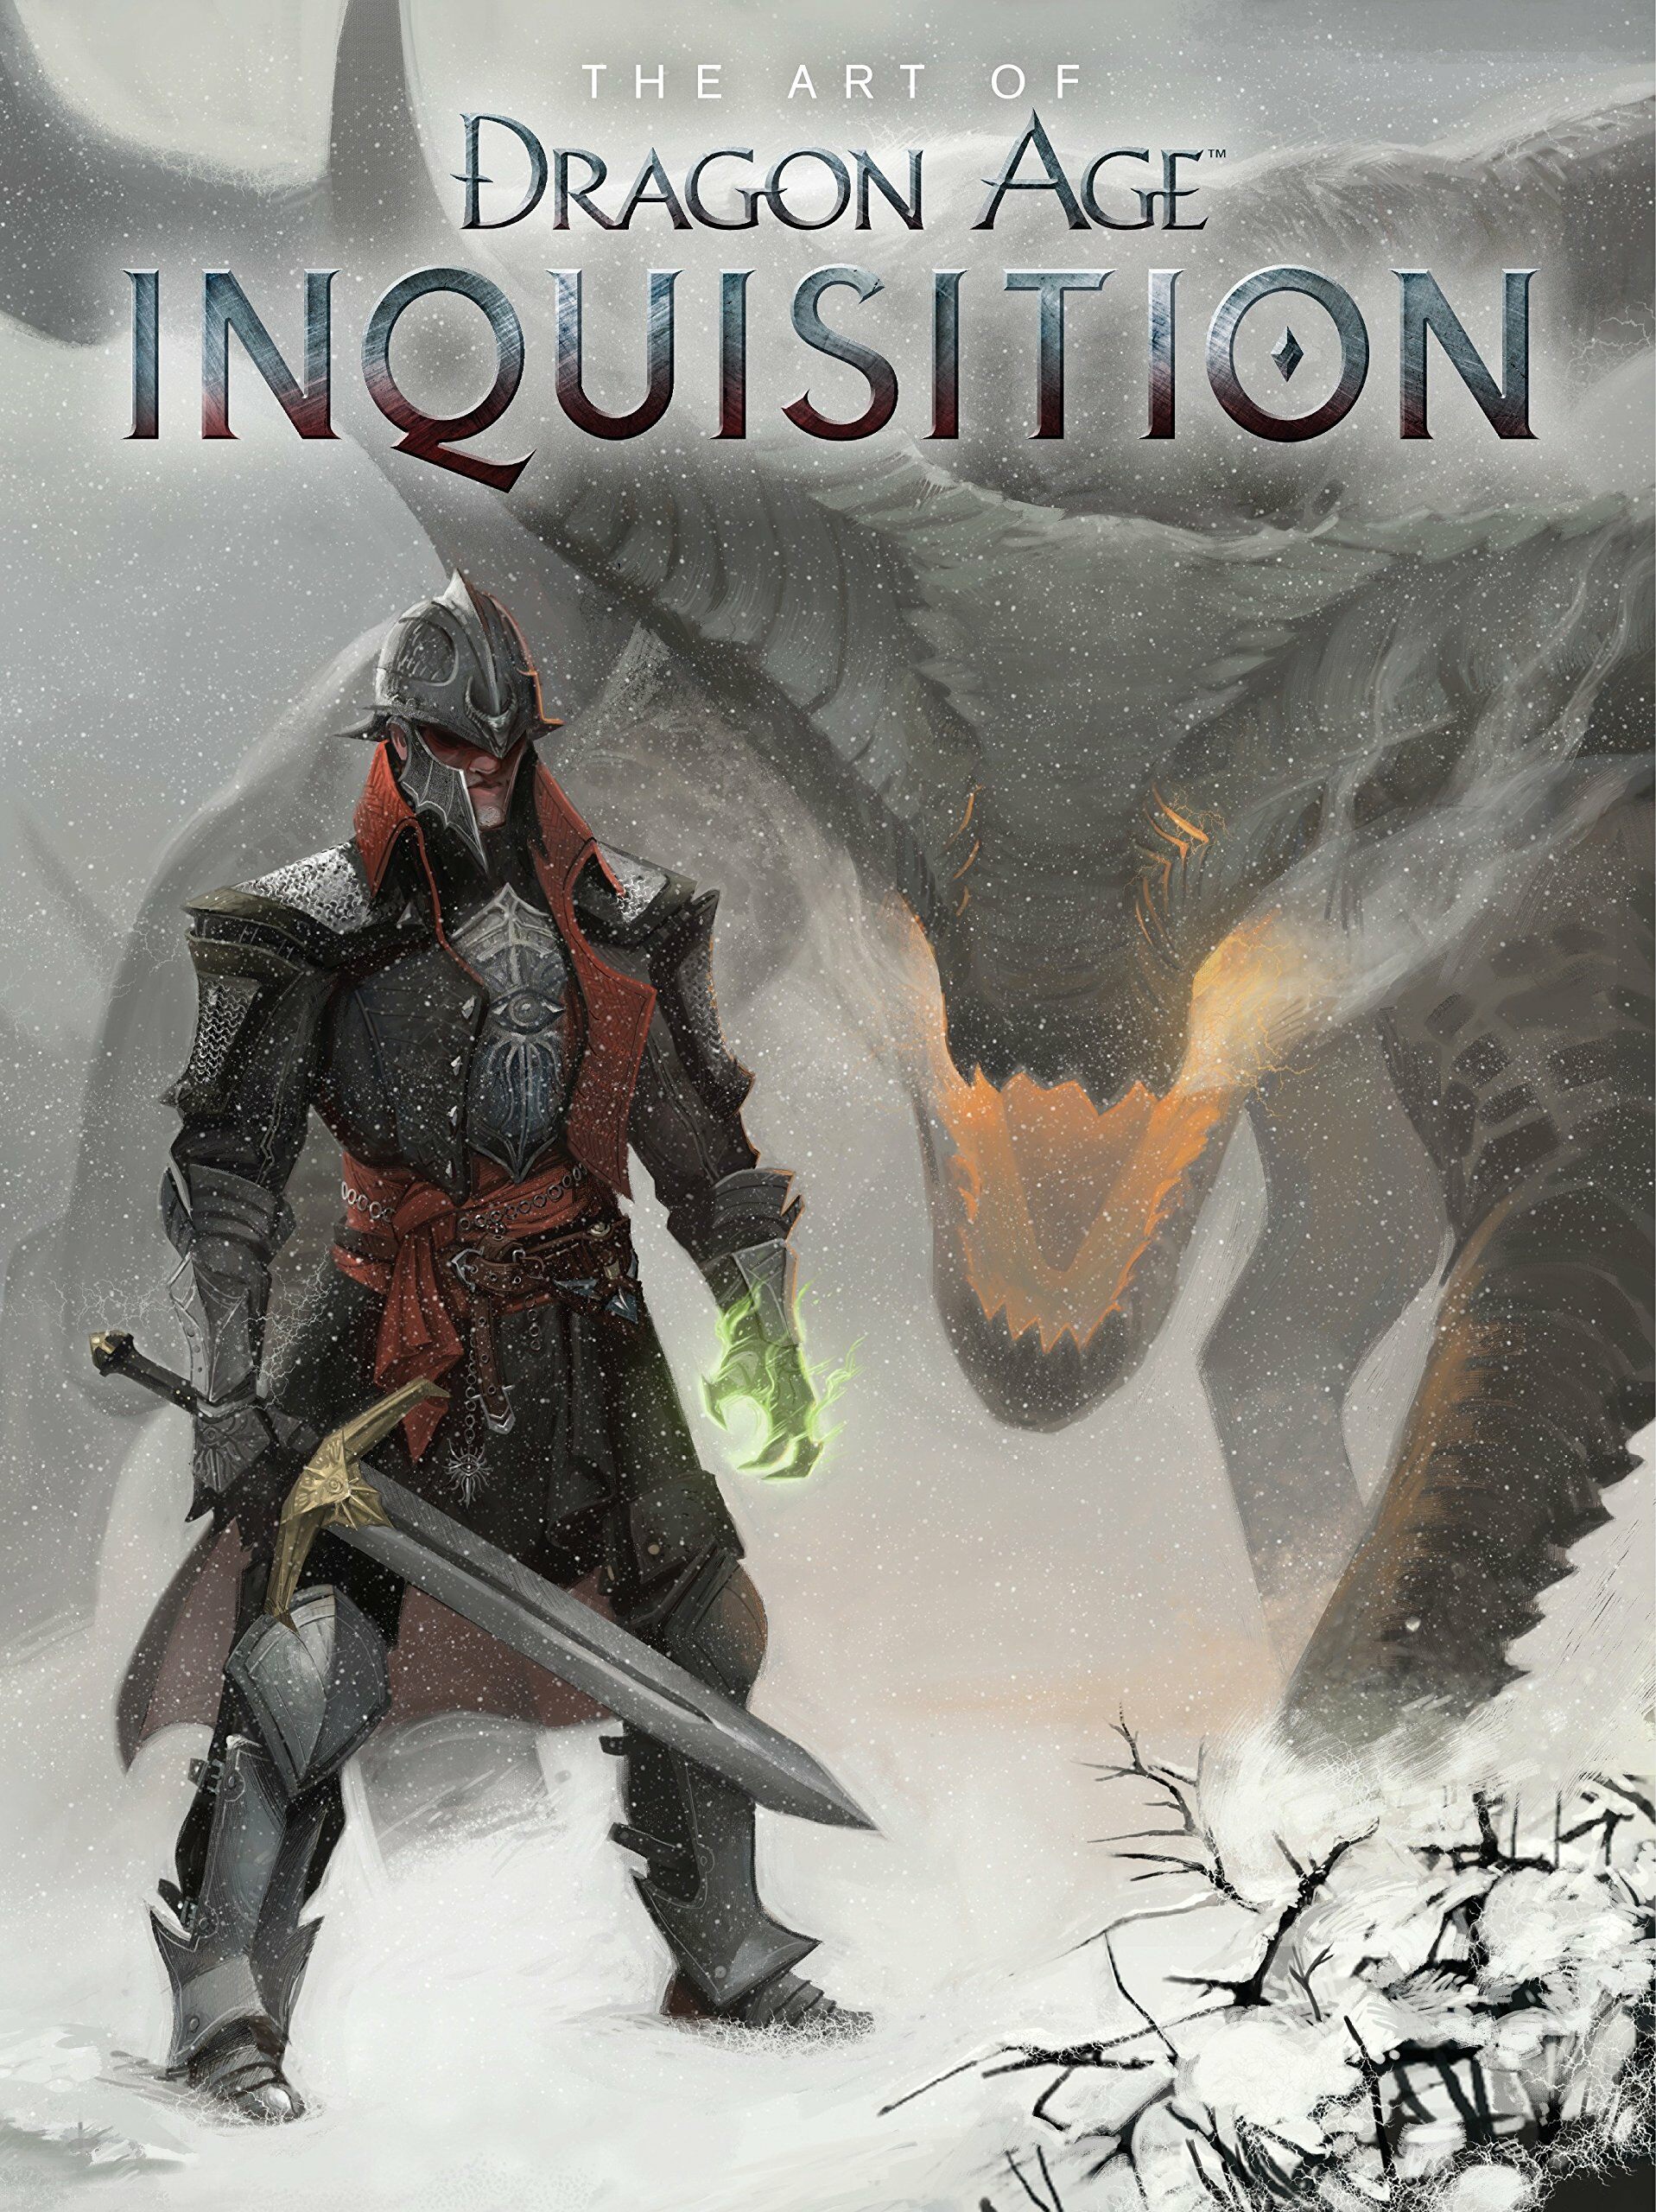 The Art of Dragon Age: Inquisition (Hardcover)